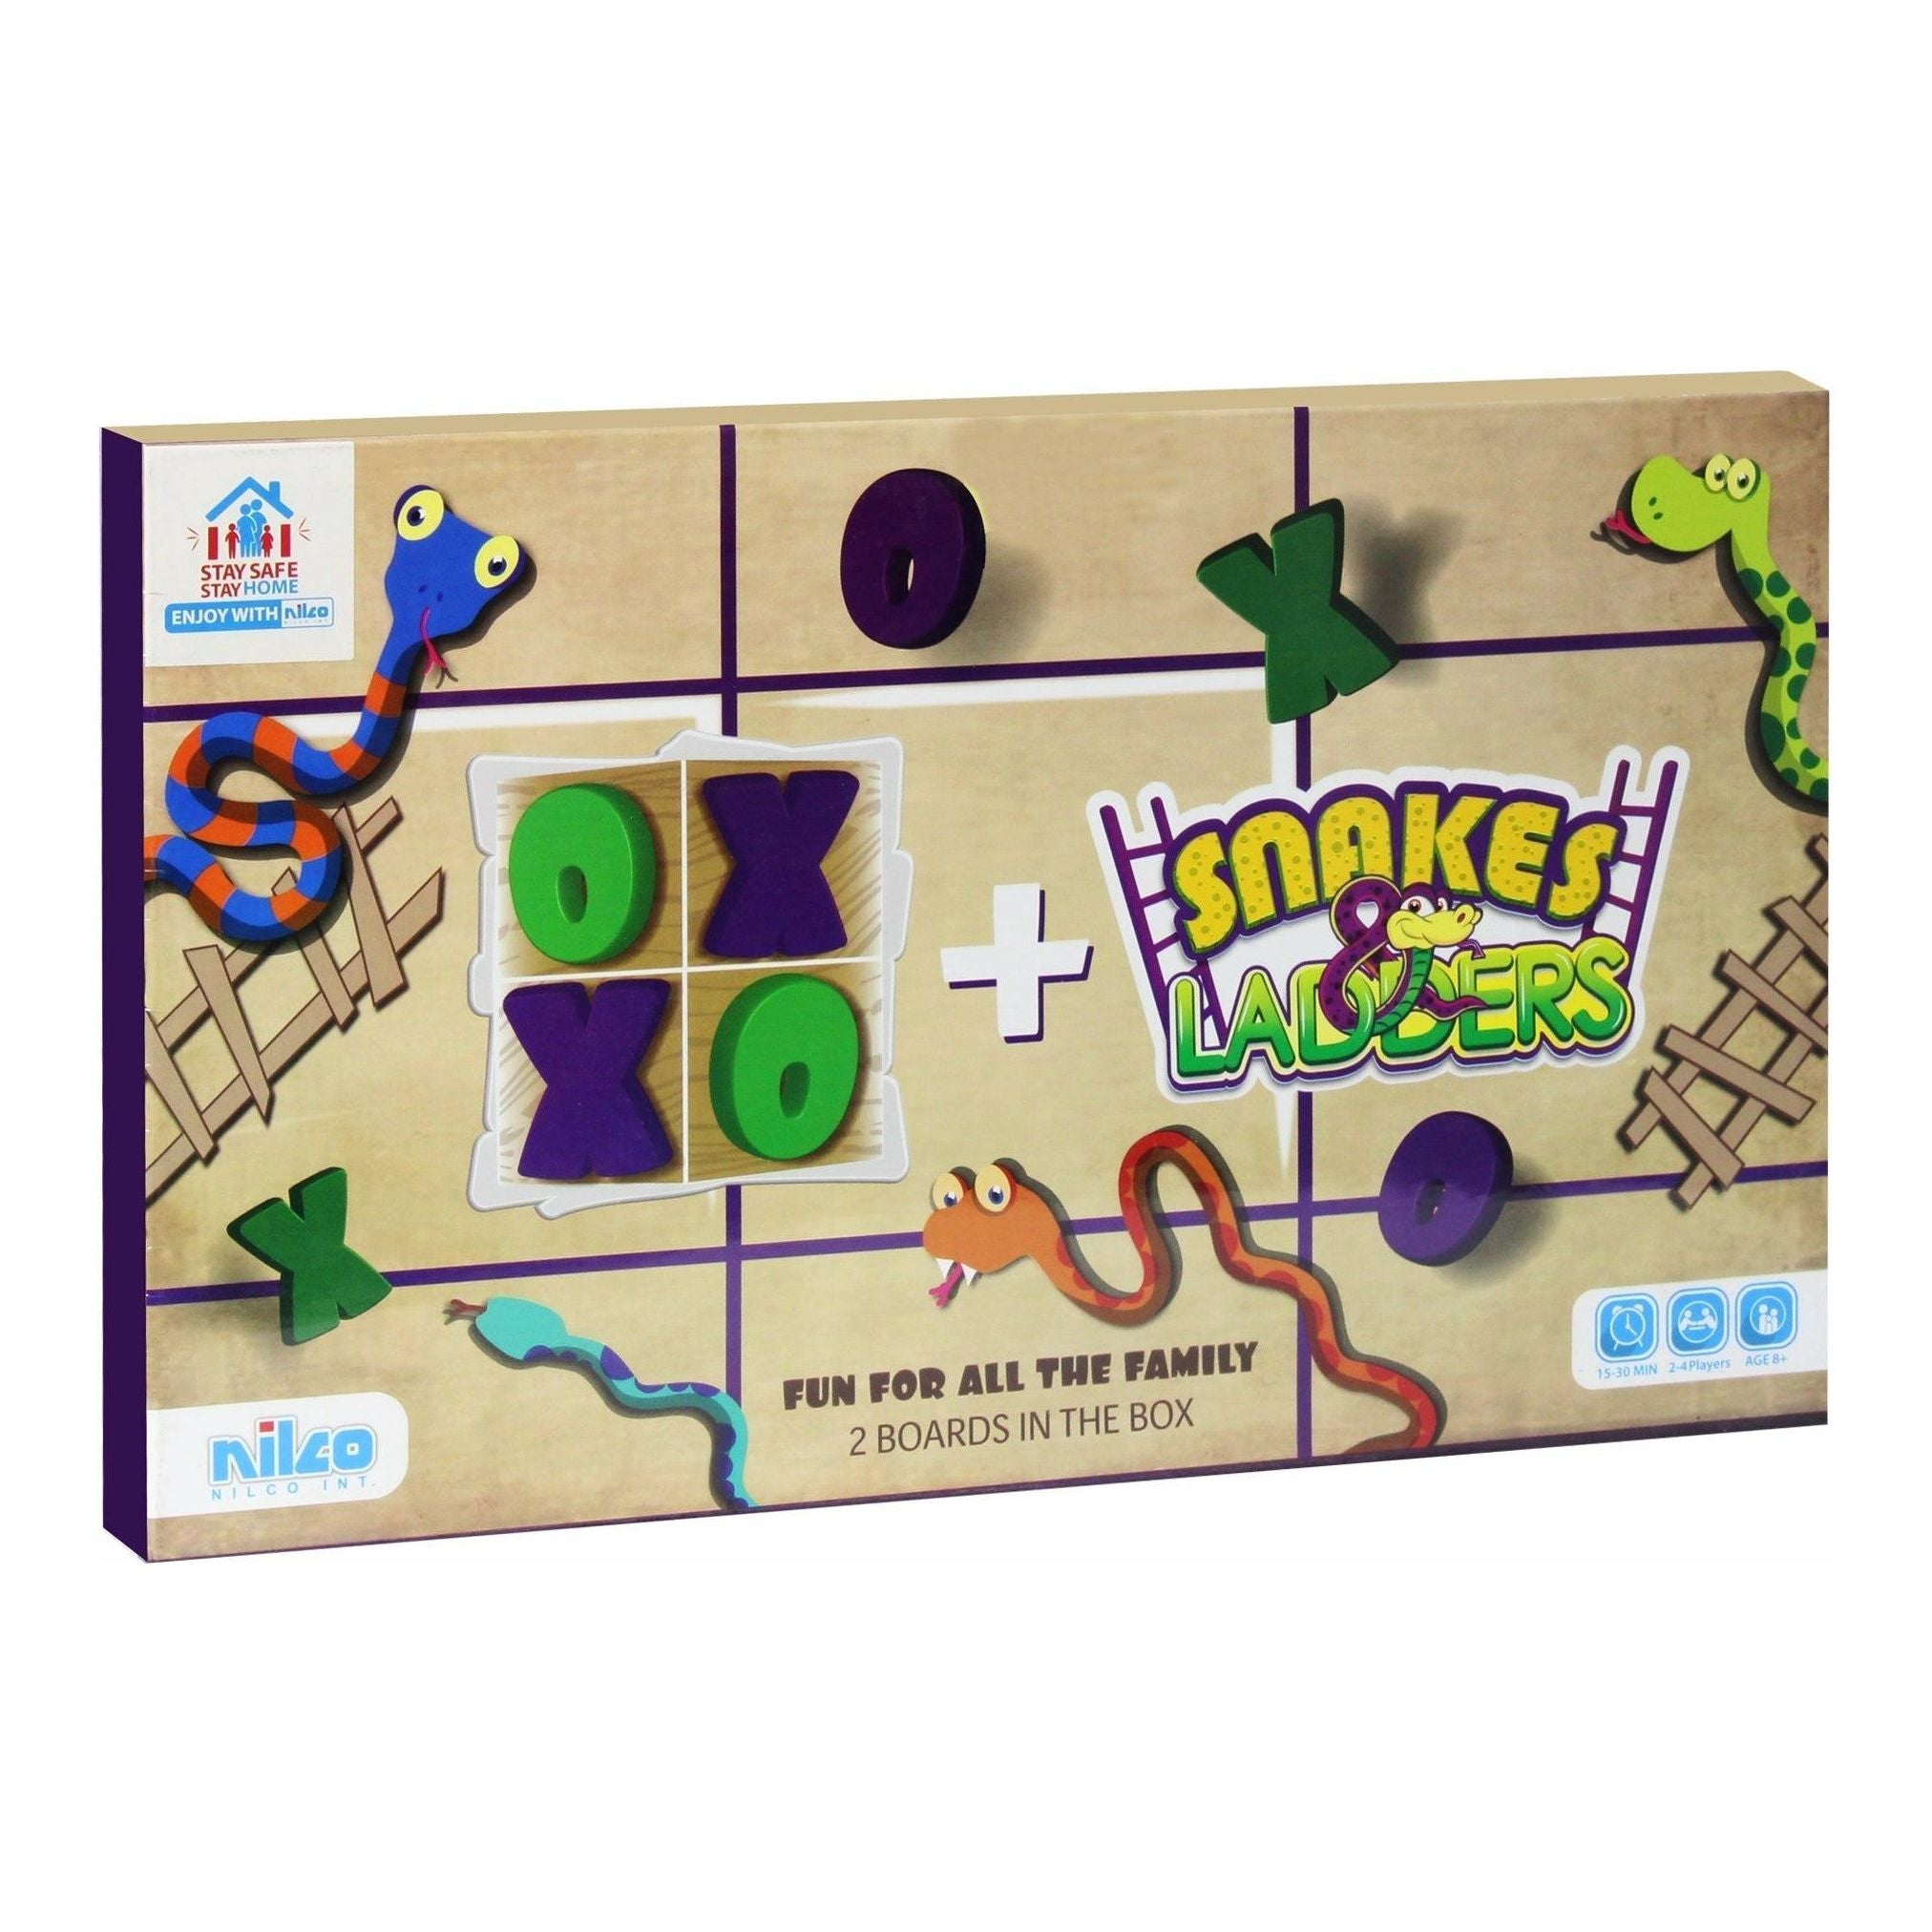 Nilco 1020 Snakes Ladders & XO Board Game - BumbleToys - 8-13 Years, Card & Board Games, Nilco, Puzzle & Board & Card Games, Unisex